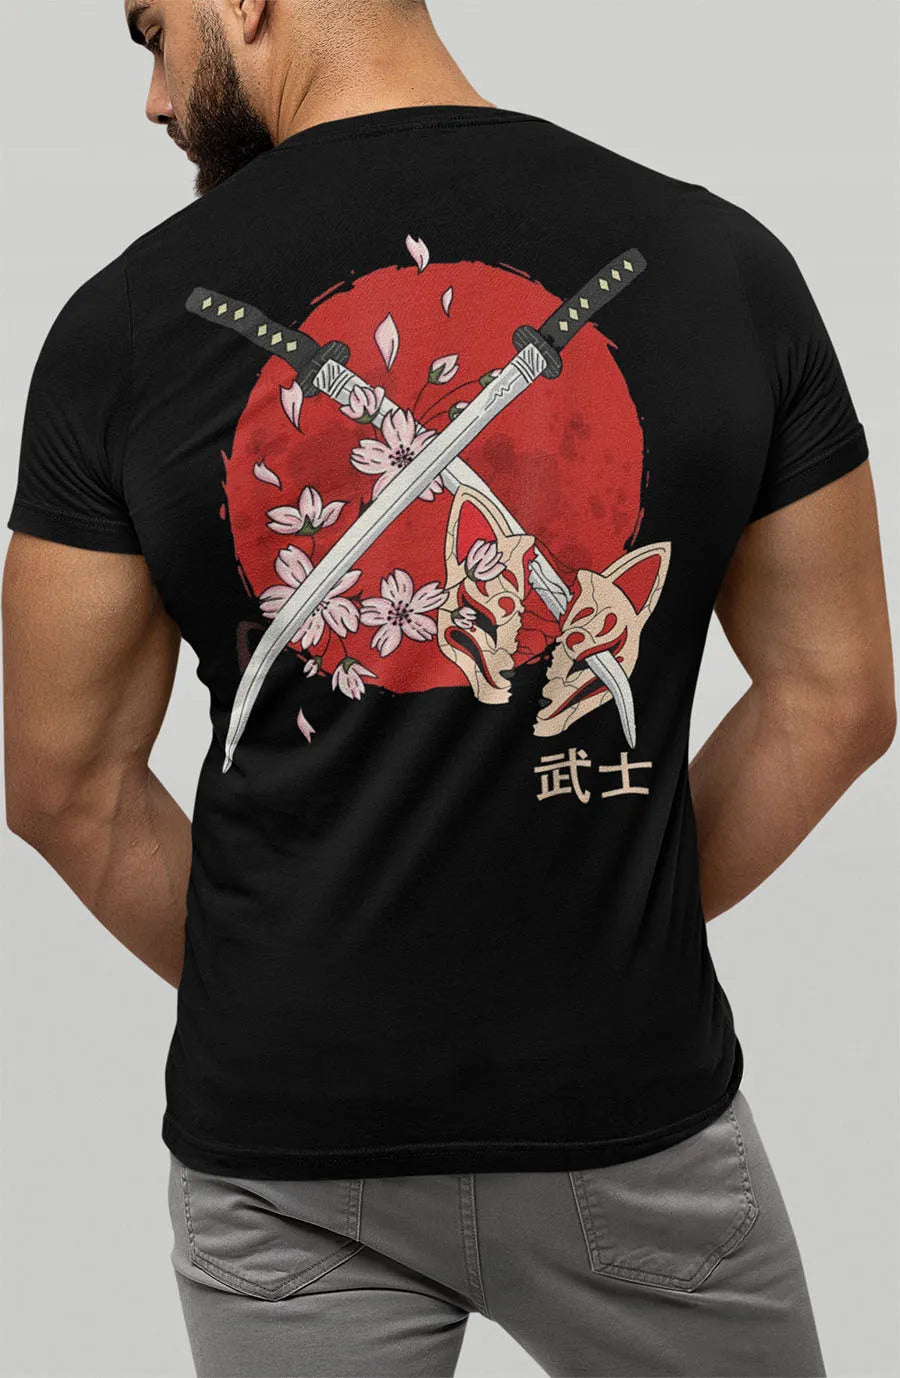 Samurai swords and cherry blossoms with a broken mask. Red lettering on the chest. Men's black t-shirt.